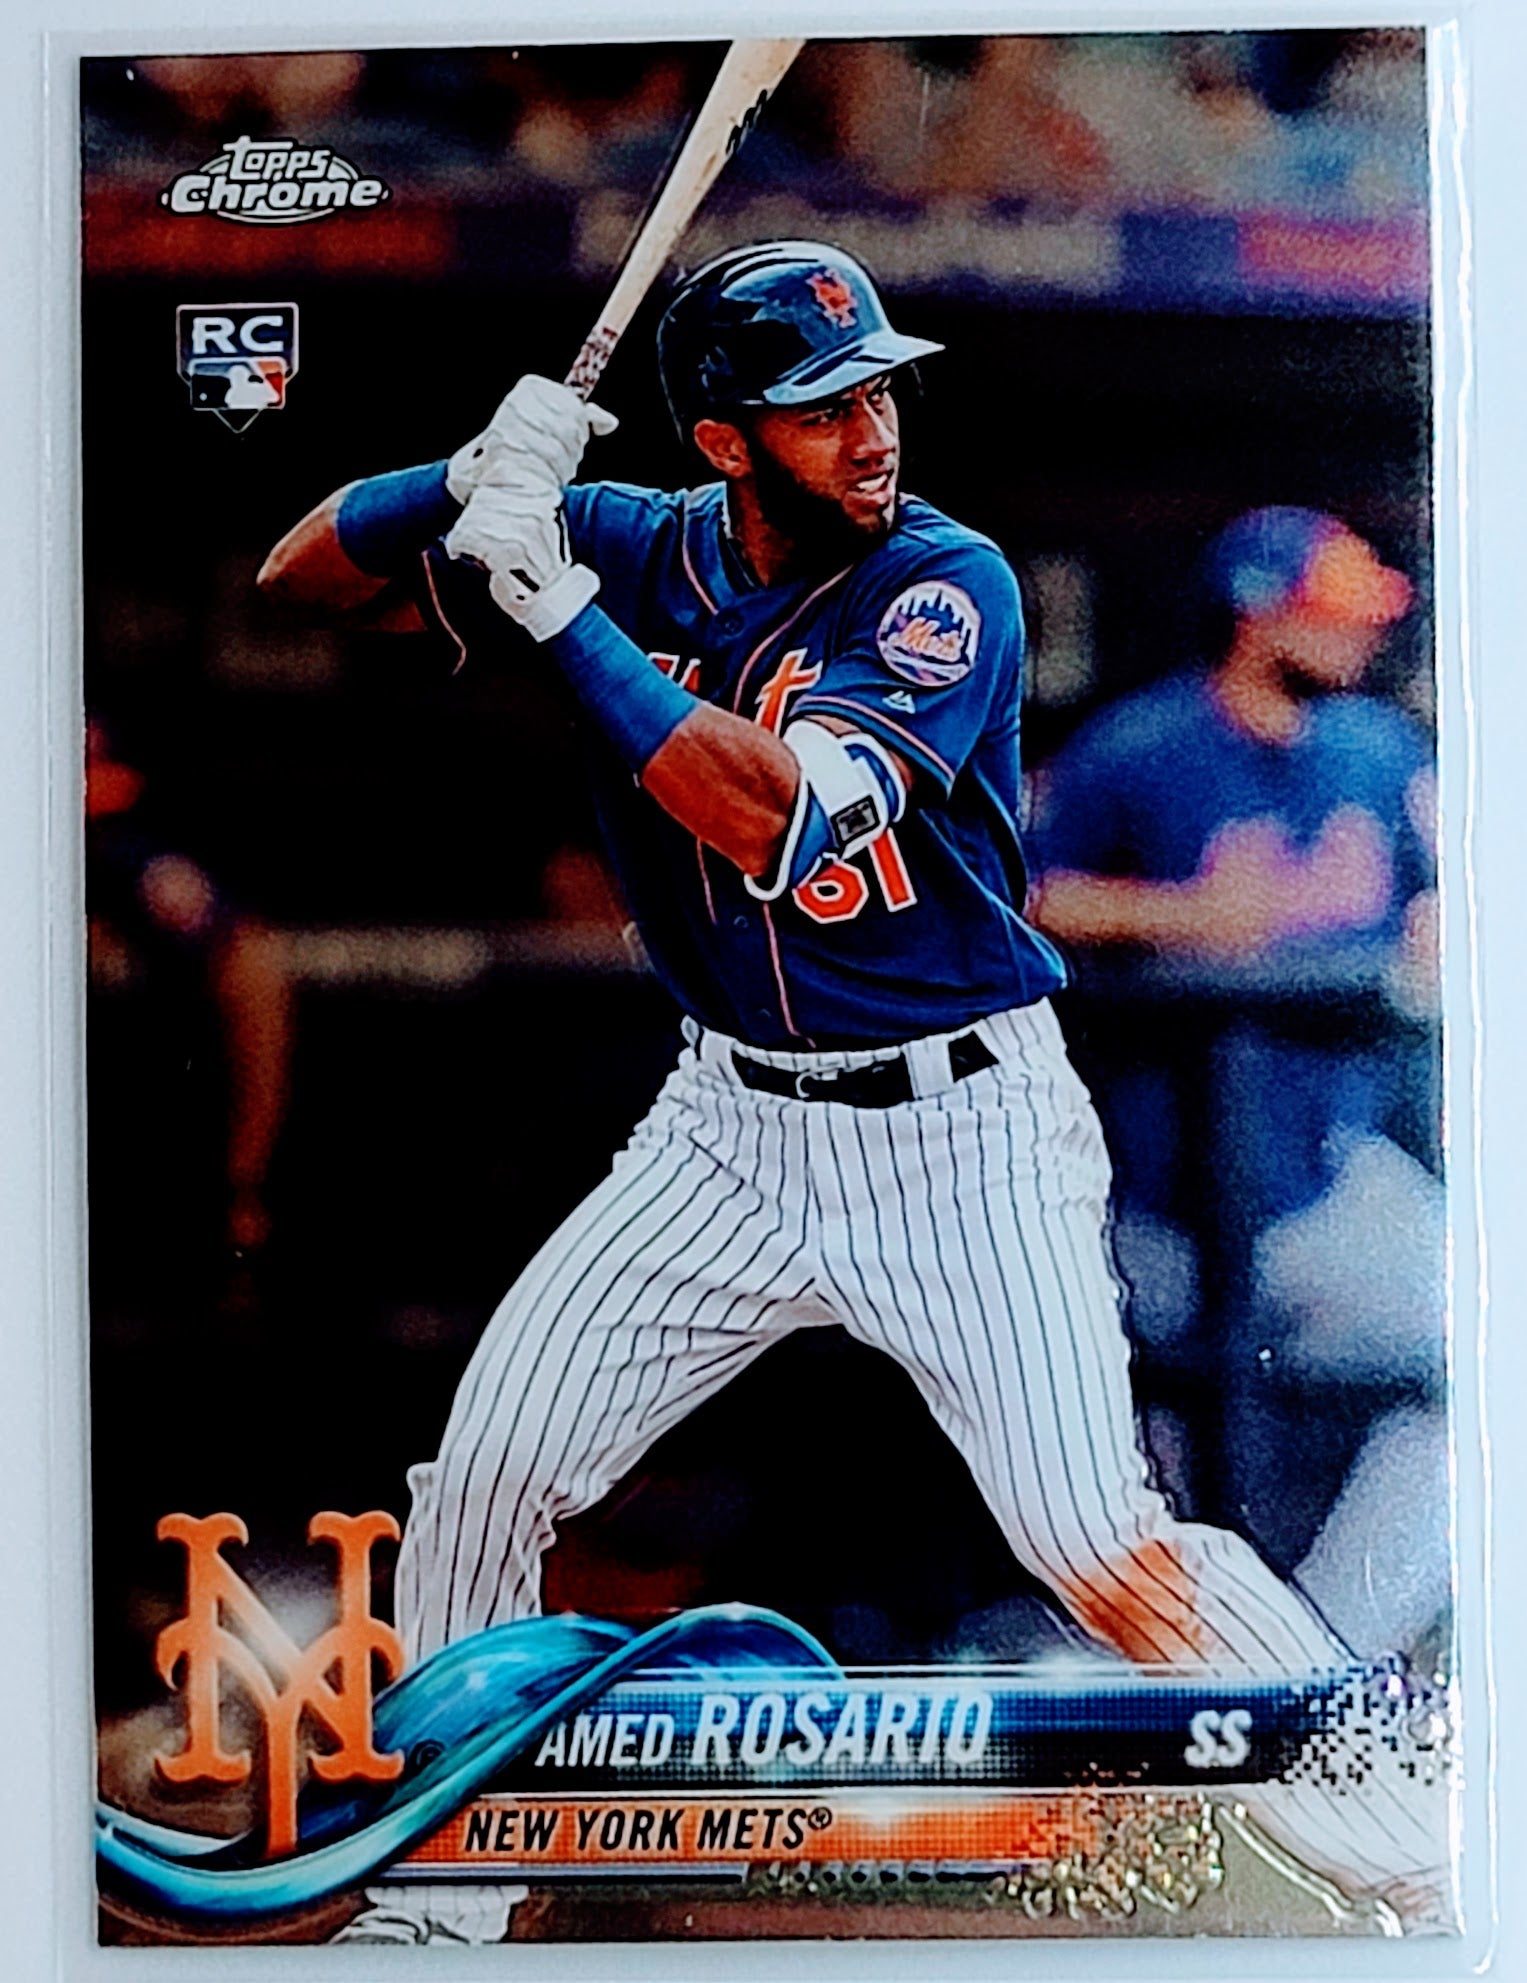 2018 Topps Chrome Amed
  Rosario   RC New York Mets Baseball
  Card TH1C4 simple Xclusive Collectibles   